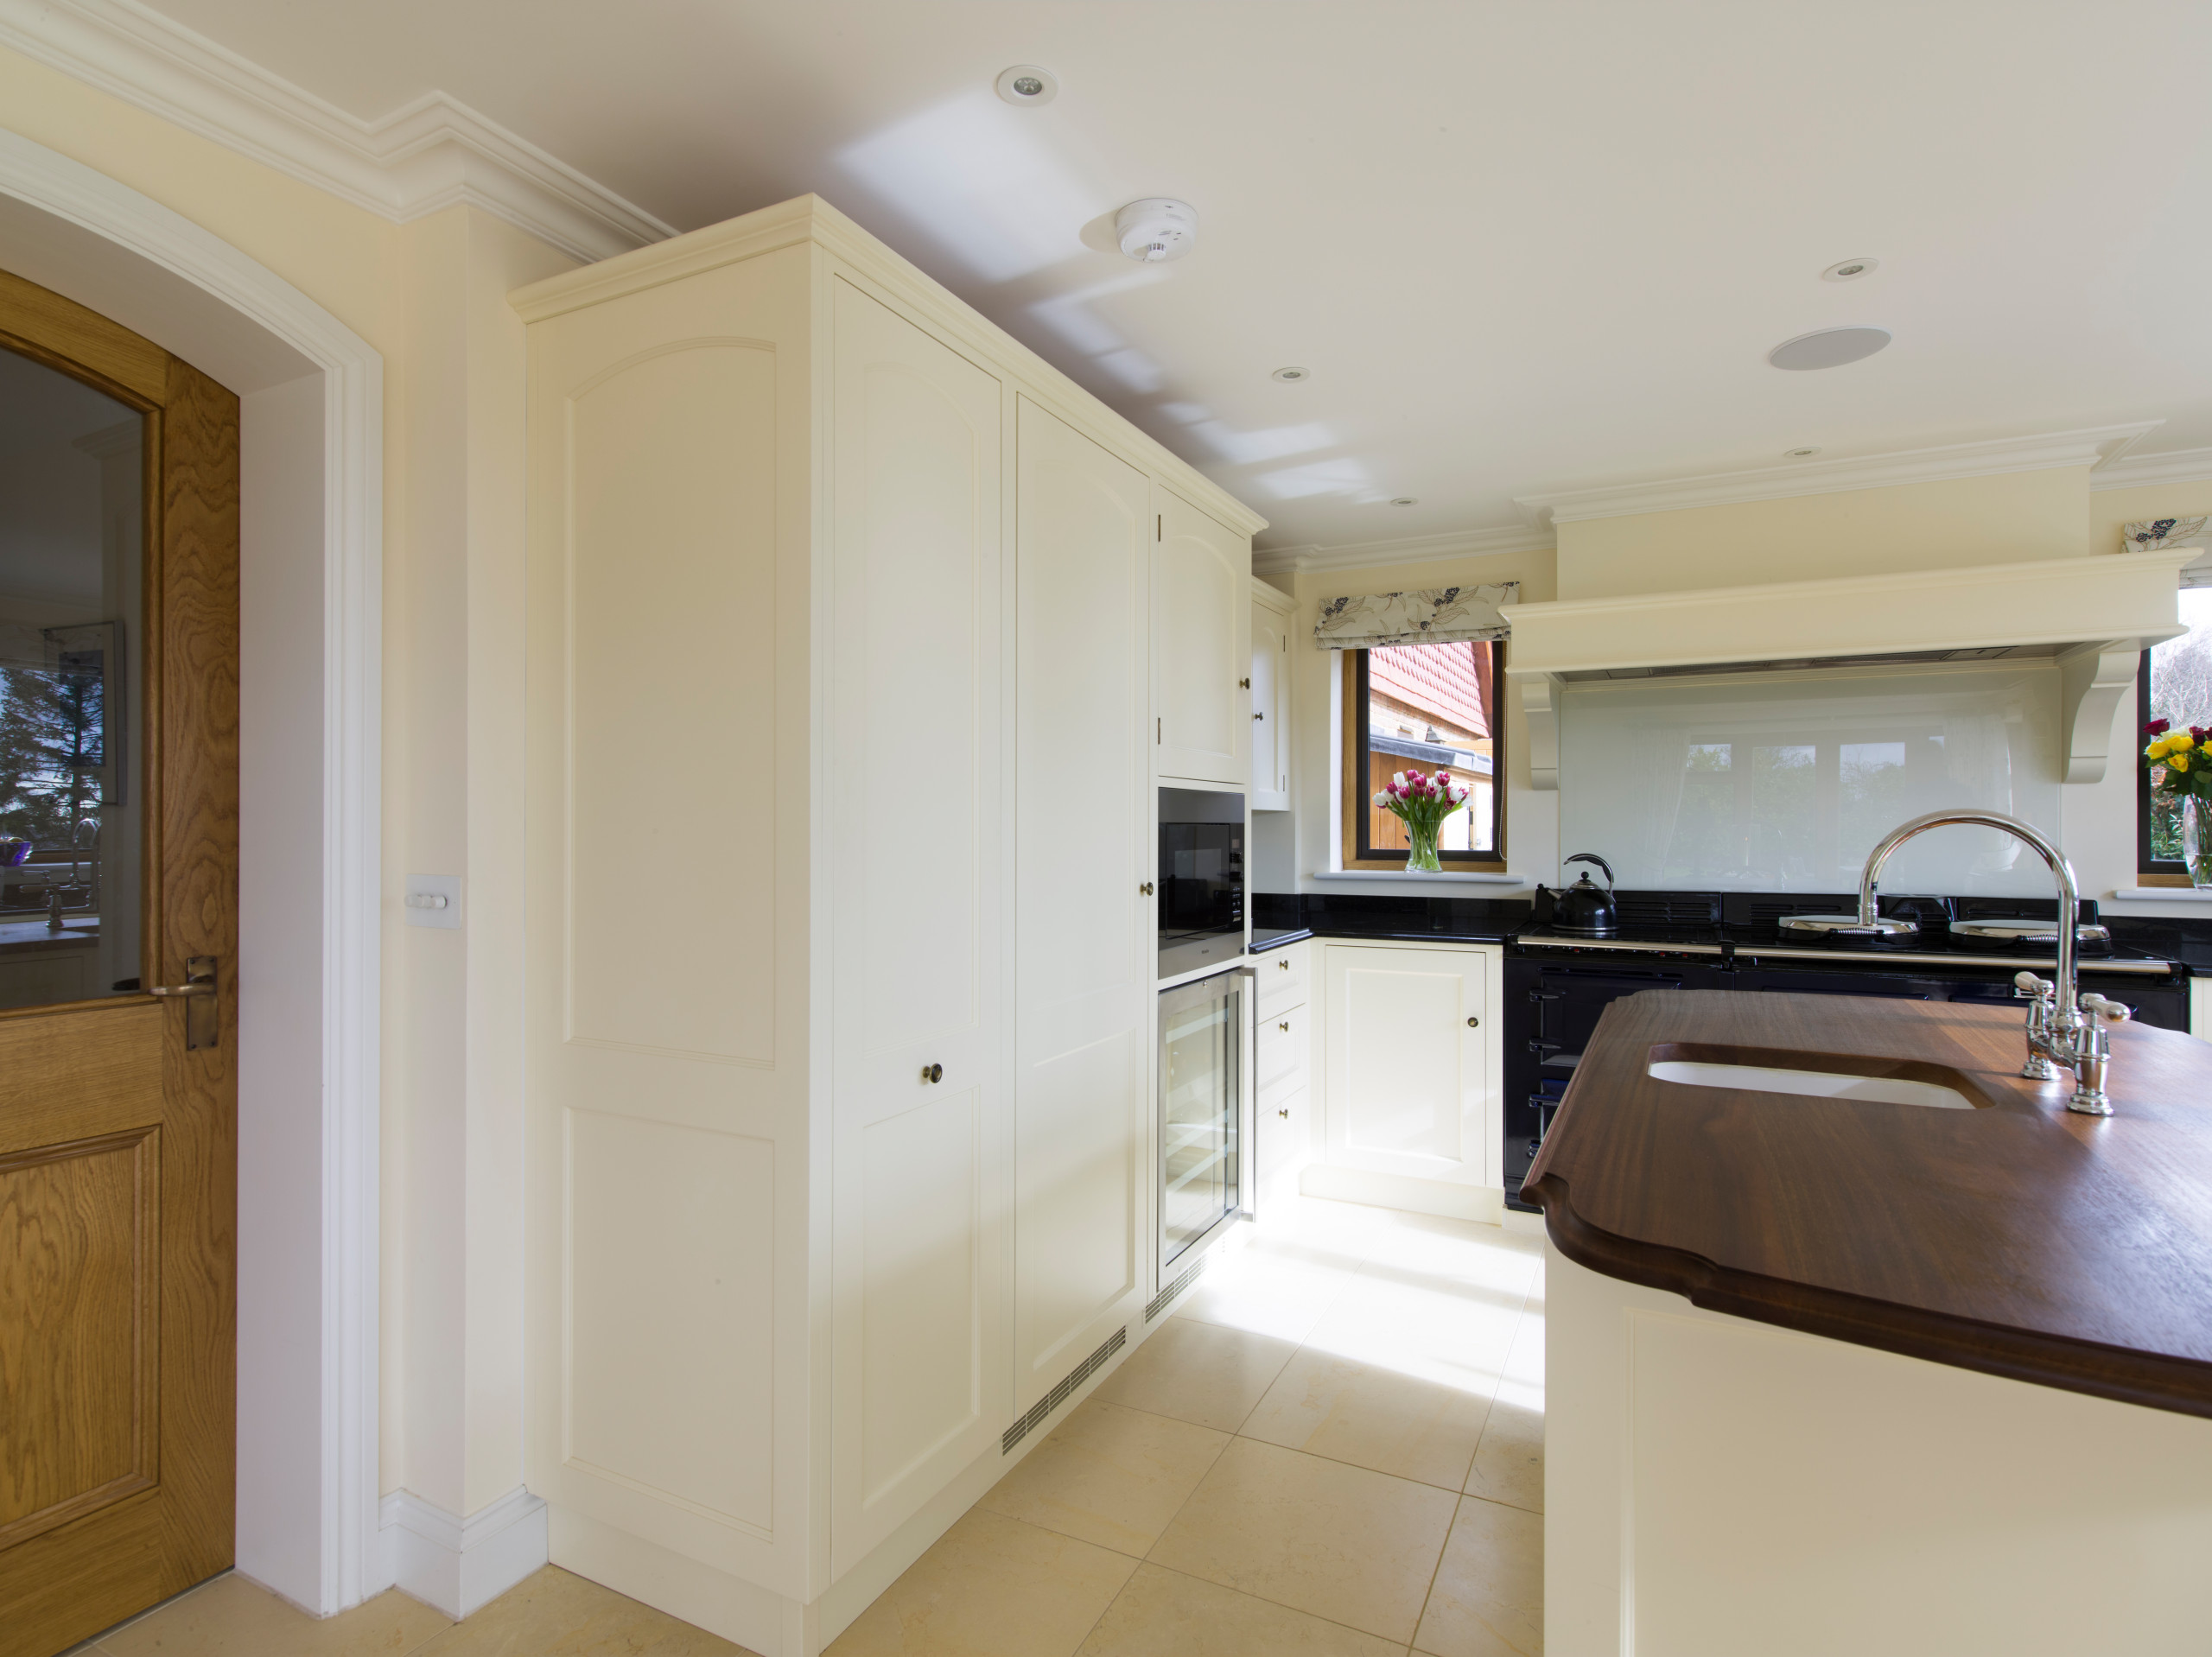 Guildford painted kitchen designed and made by Tim Wood